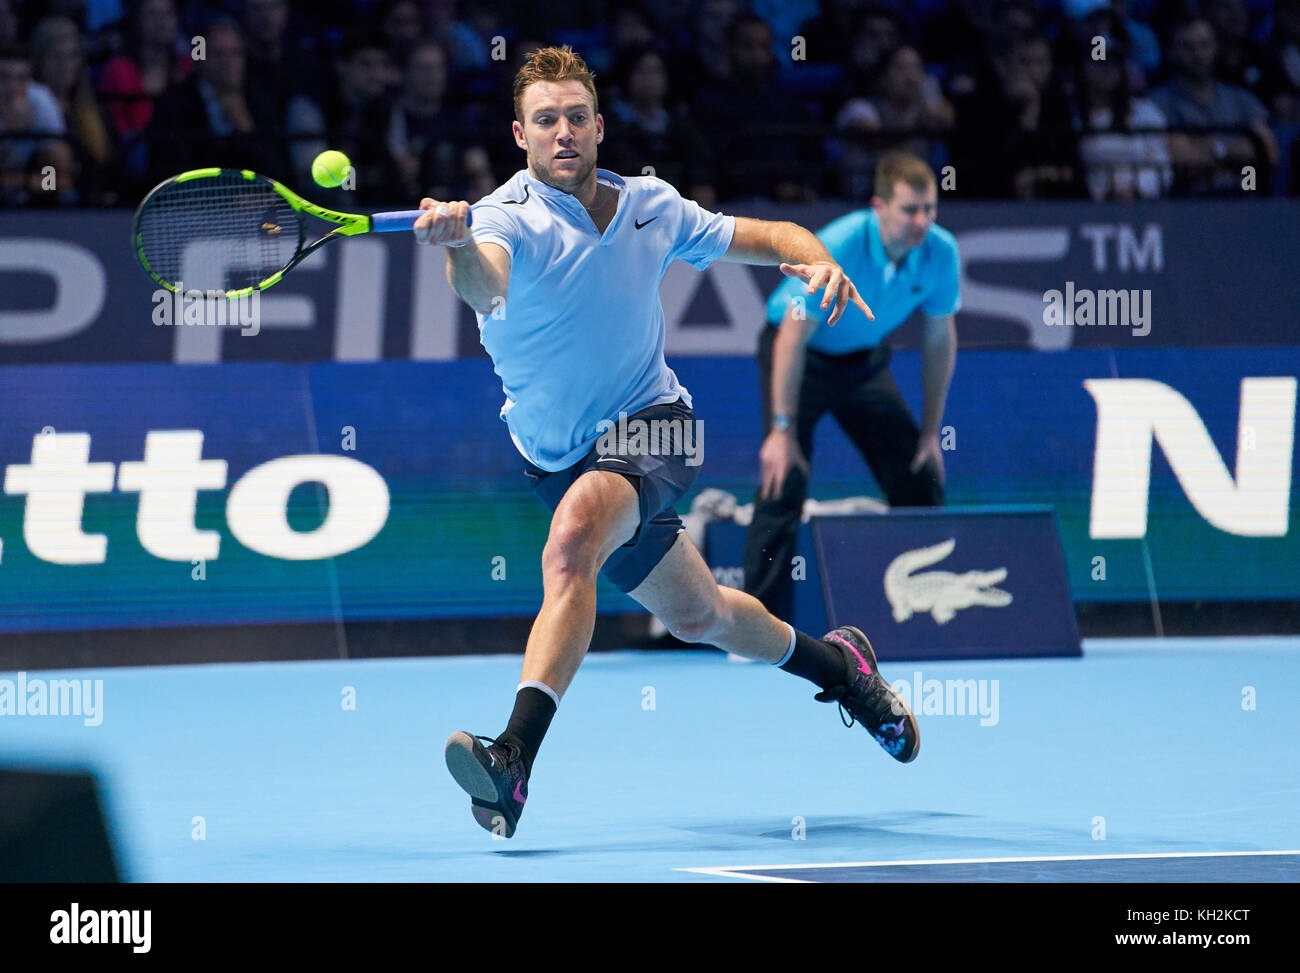 ATP Tennis, London, November 13, 2017 Jack SOCK, USA in forehand action  Roger FEDERER, SUI - Jack SOCK, USA 6-4, 7-6 at the NITTO ATP FINALS Tennis  men in Millenium Arena, O2